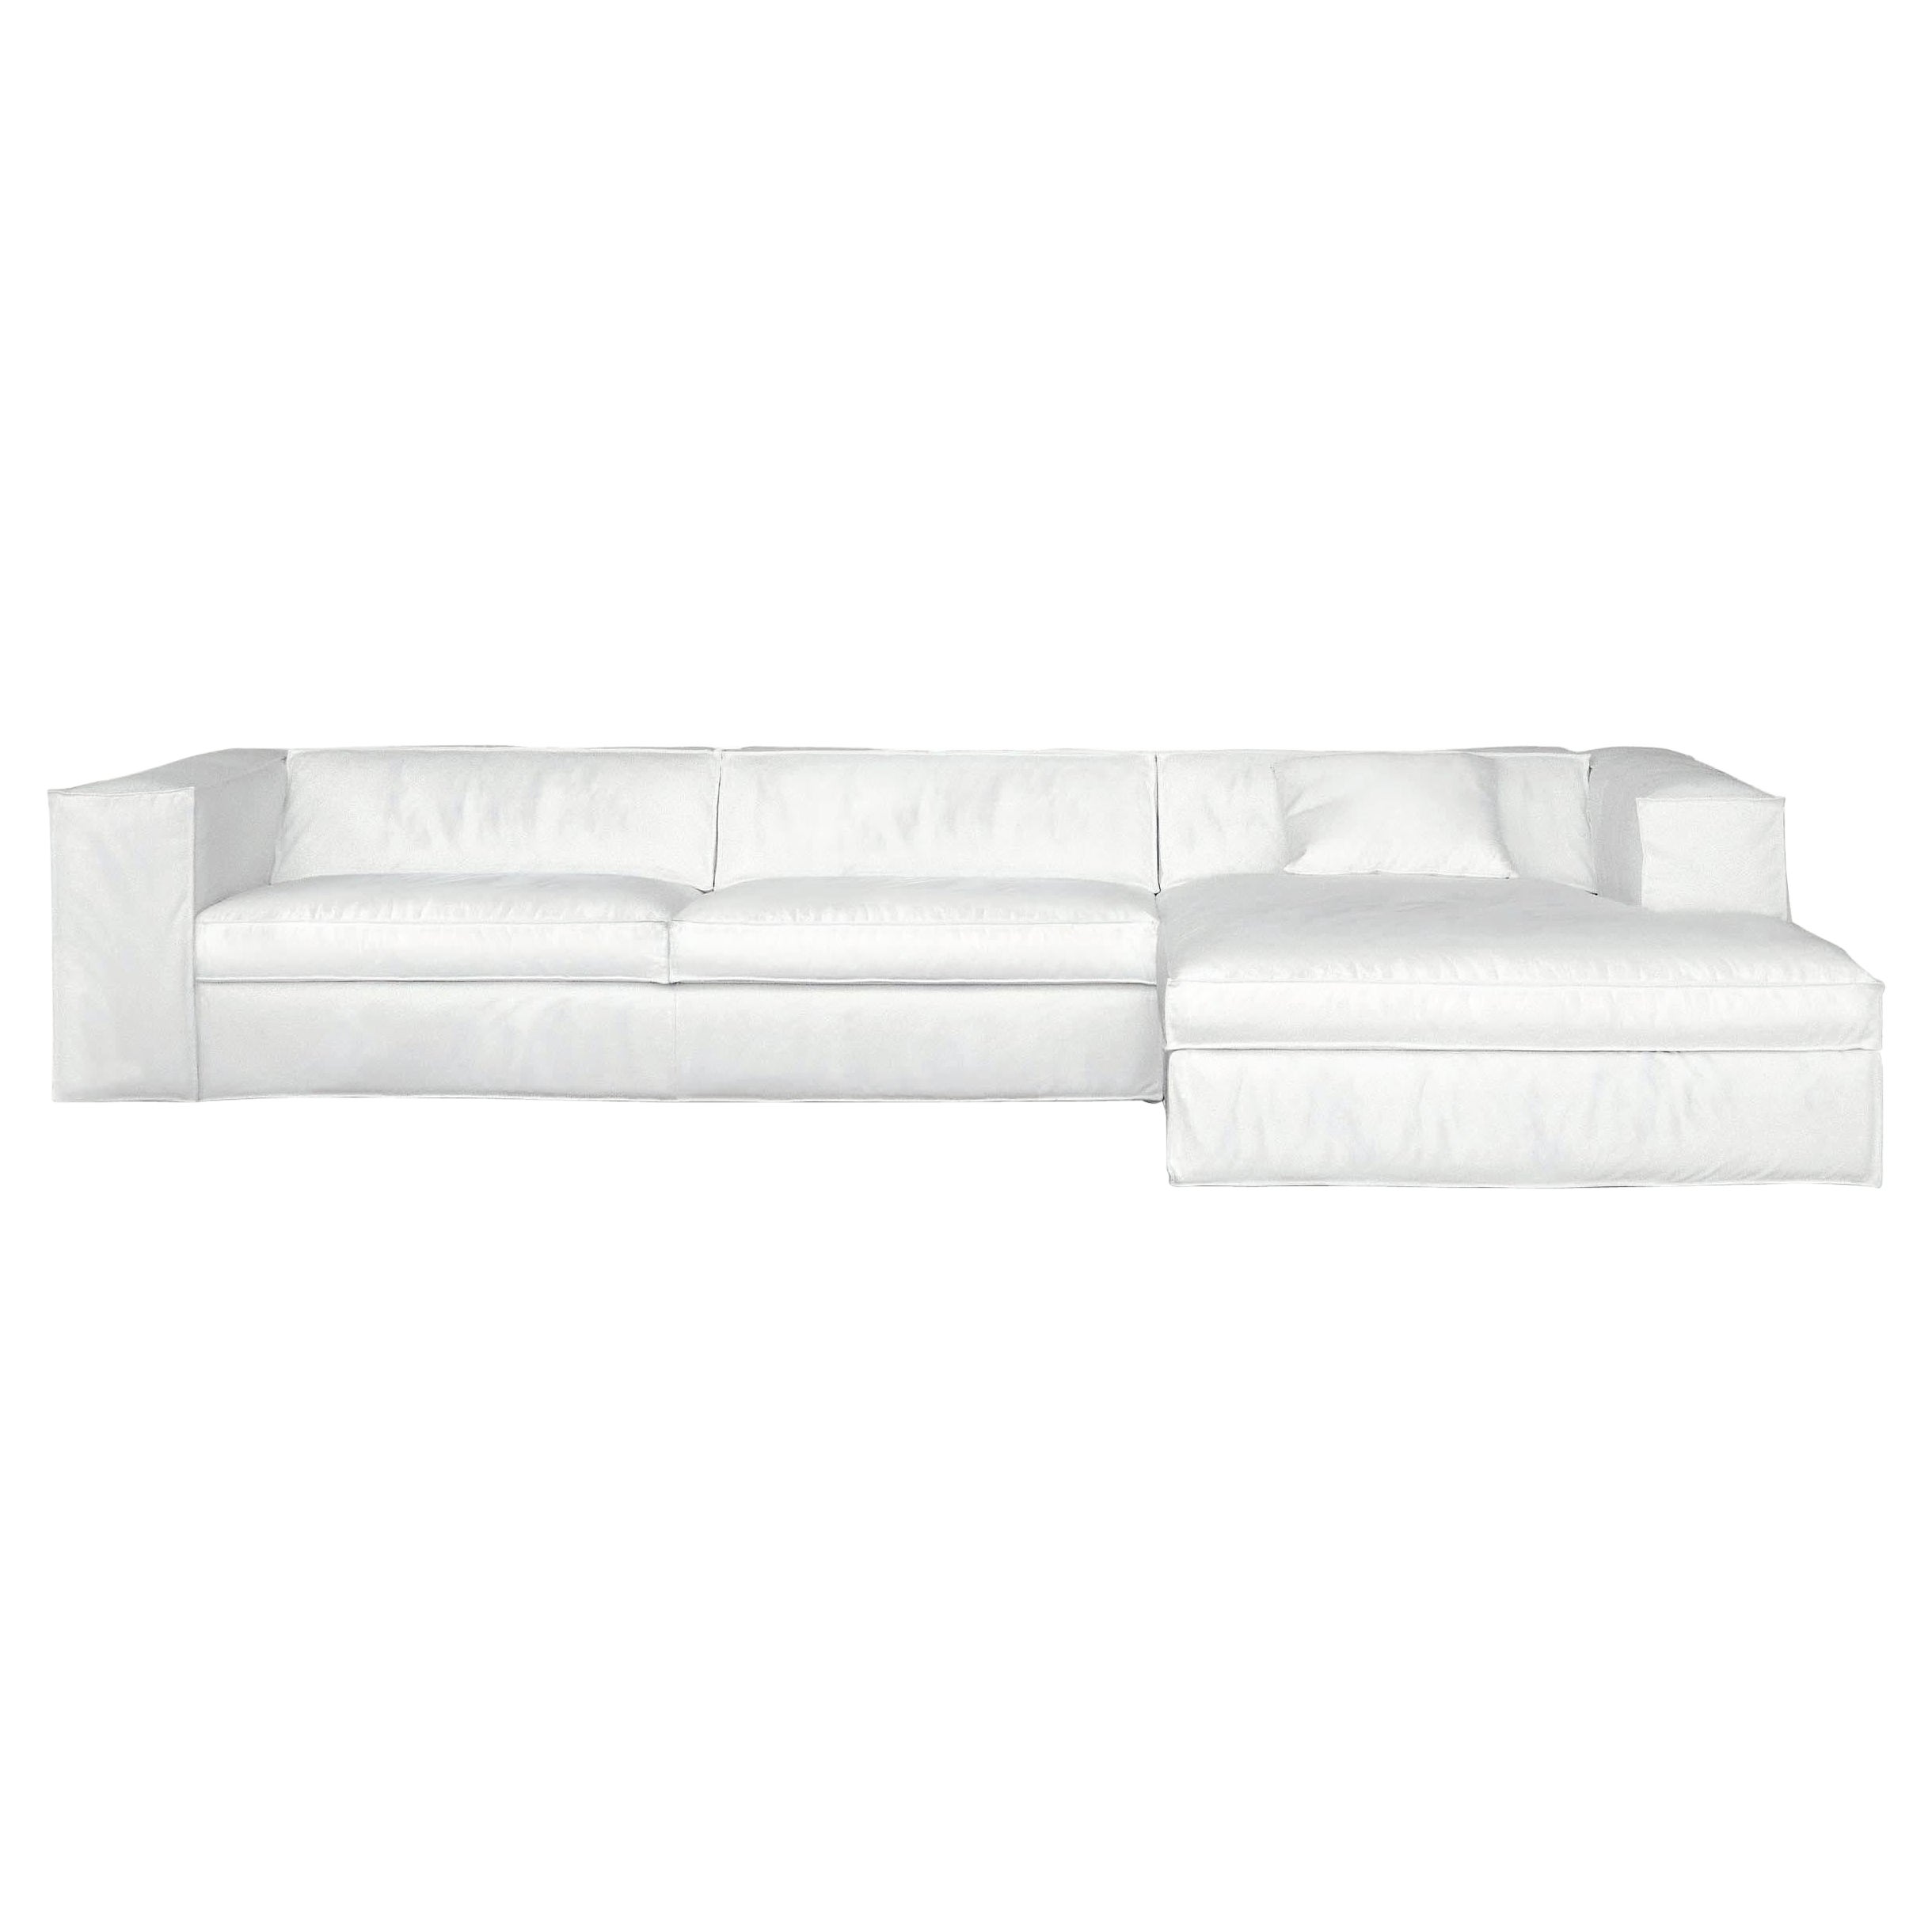 Up Large Modular Sofa in Lusso White Upholstery by Giuseppe Viganò For Sale